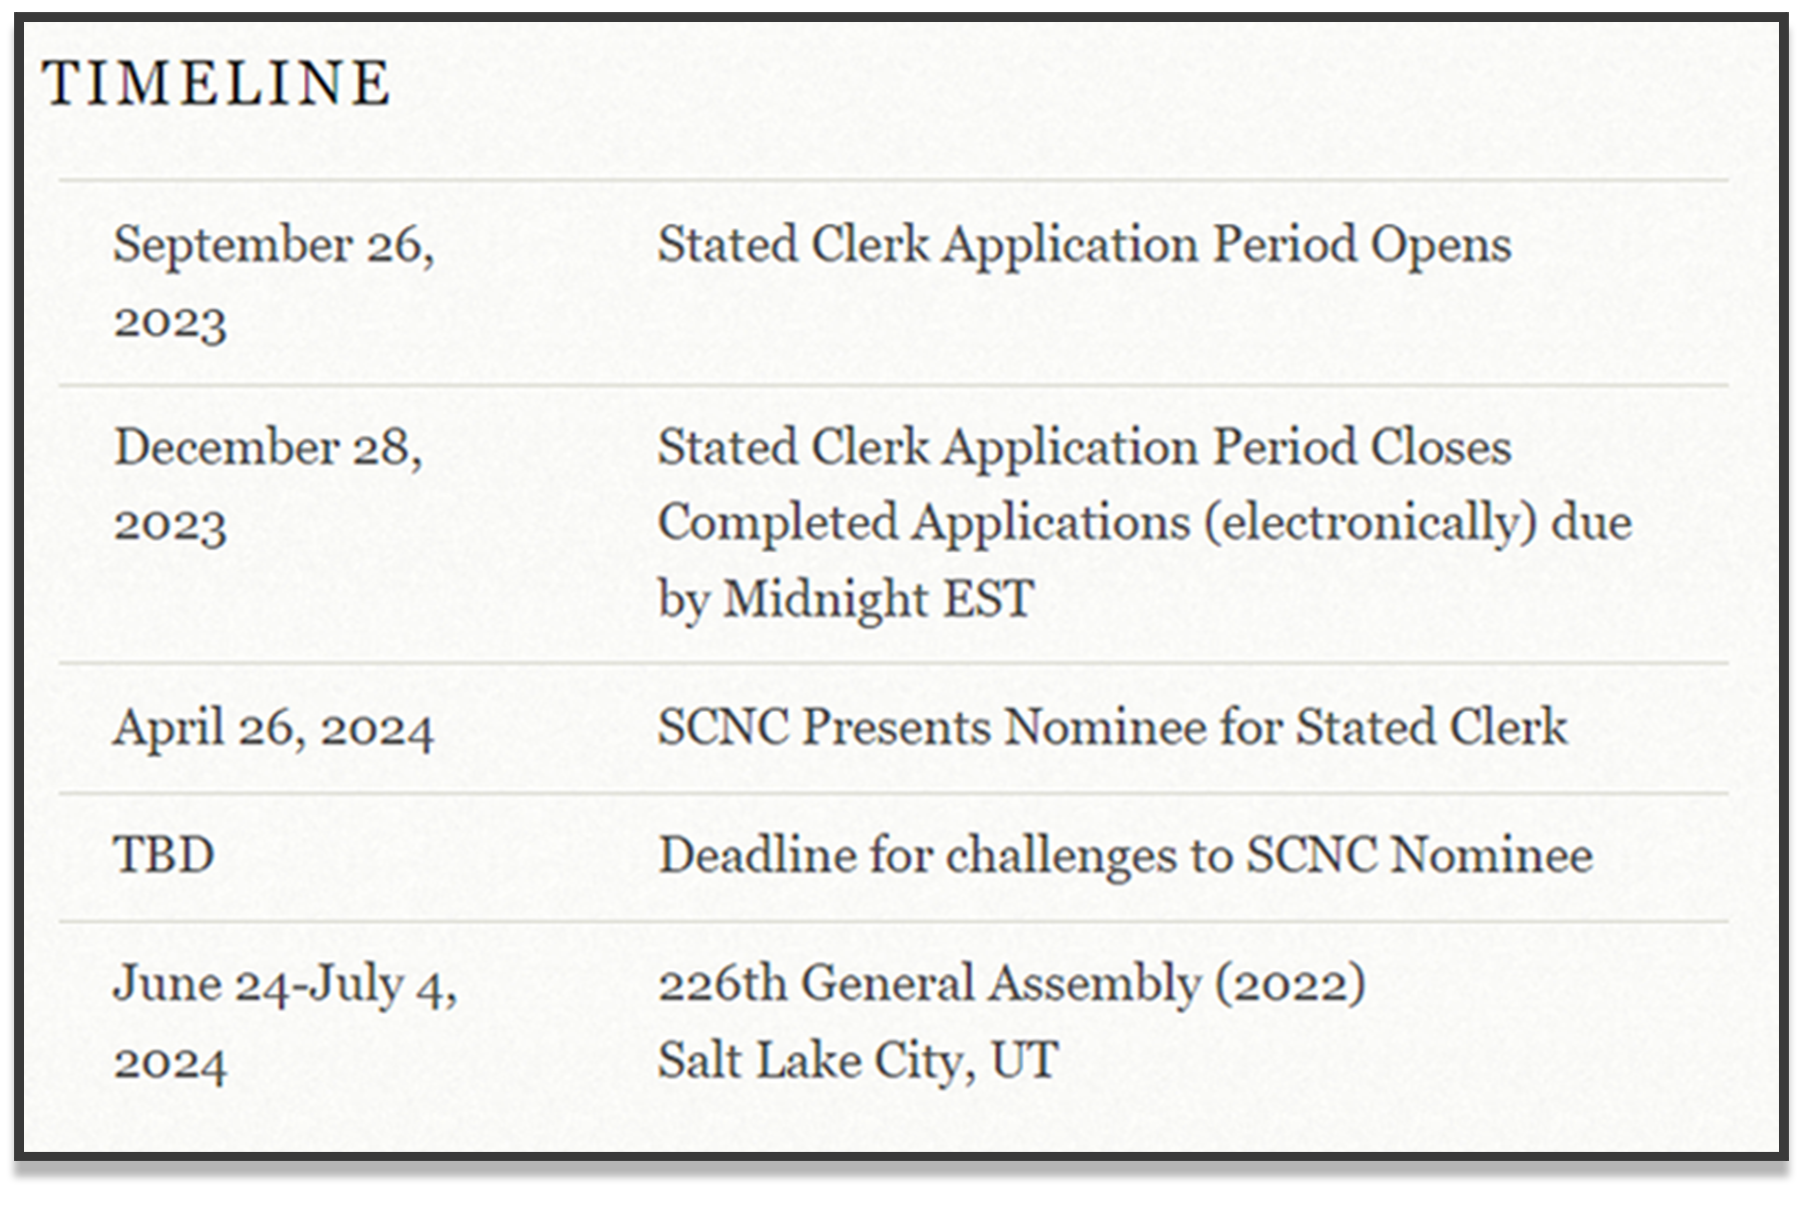 Stated Clerk Nominating Committee timeline, per SCNC web page.